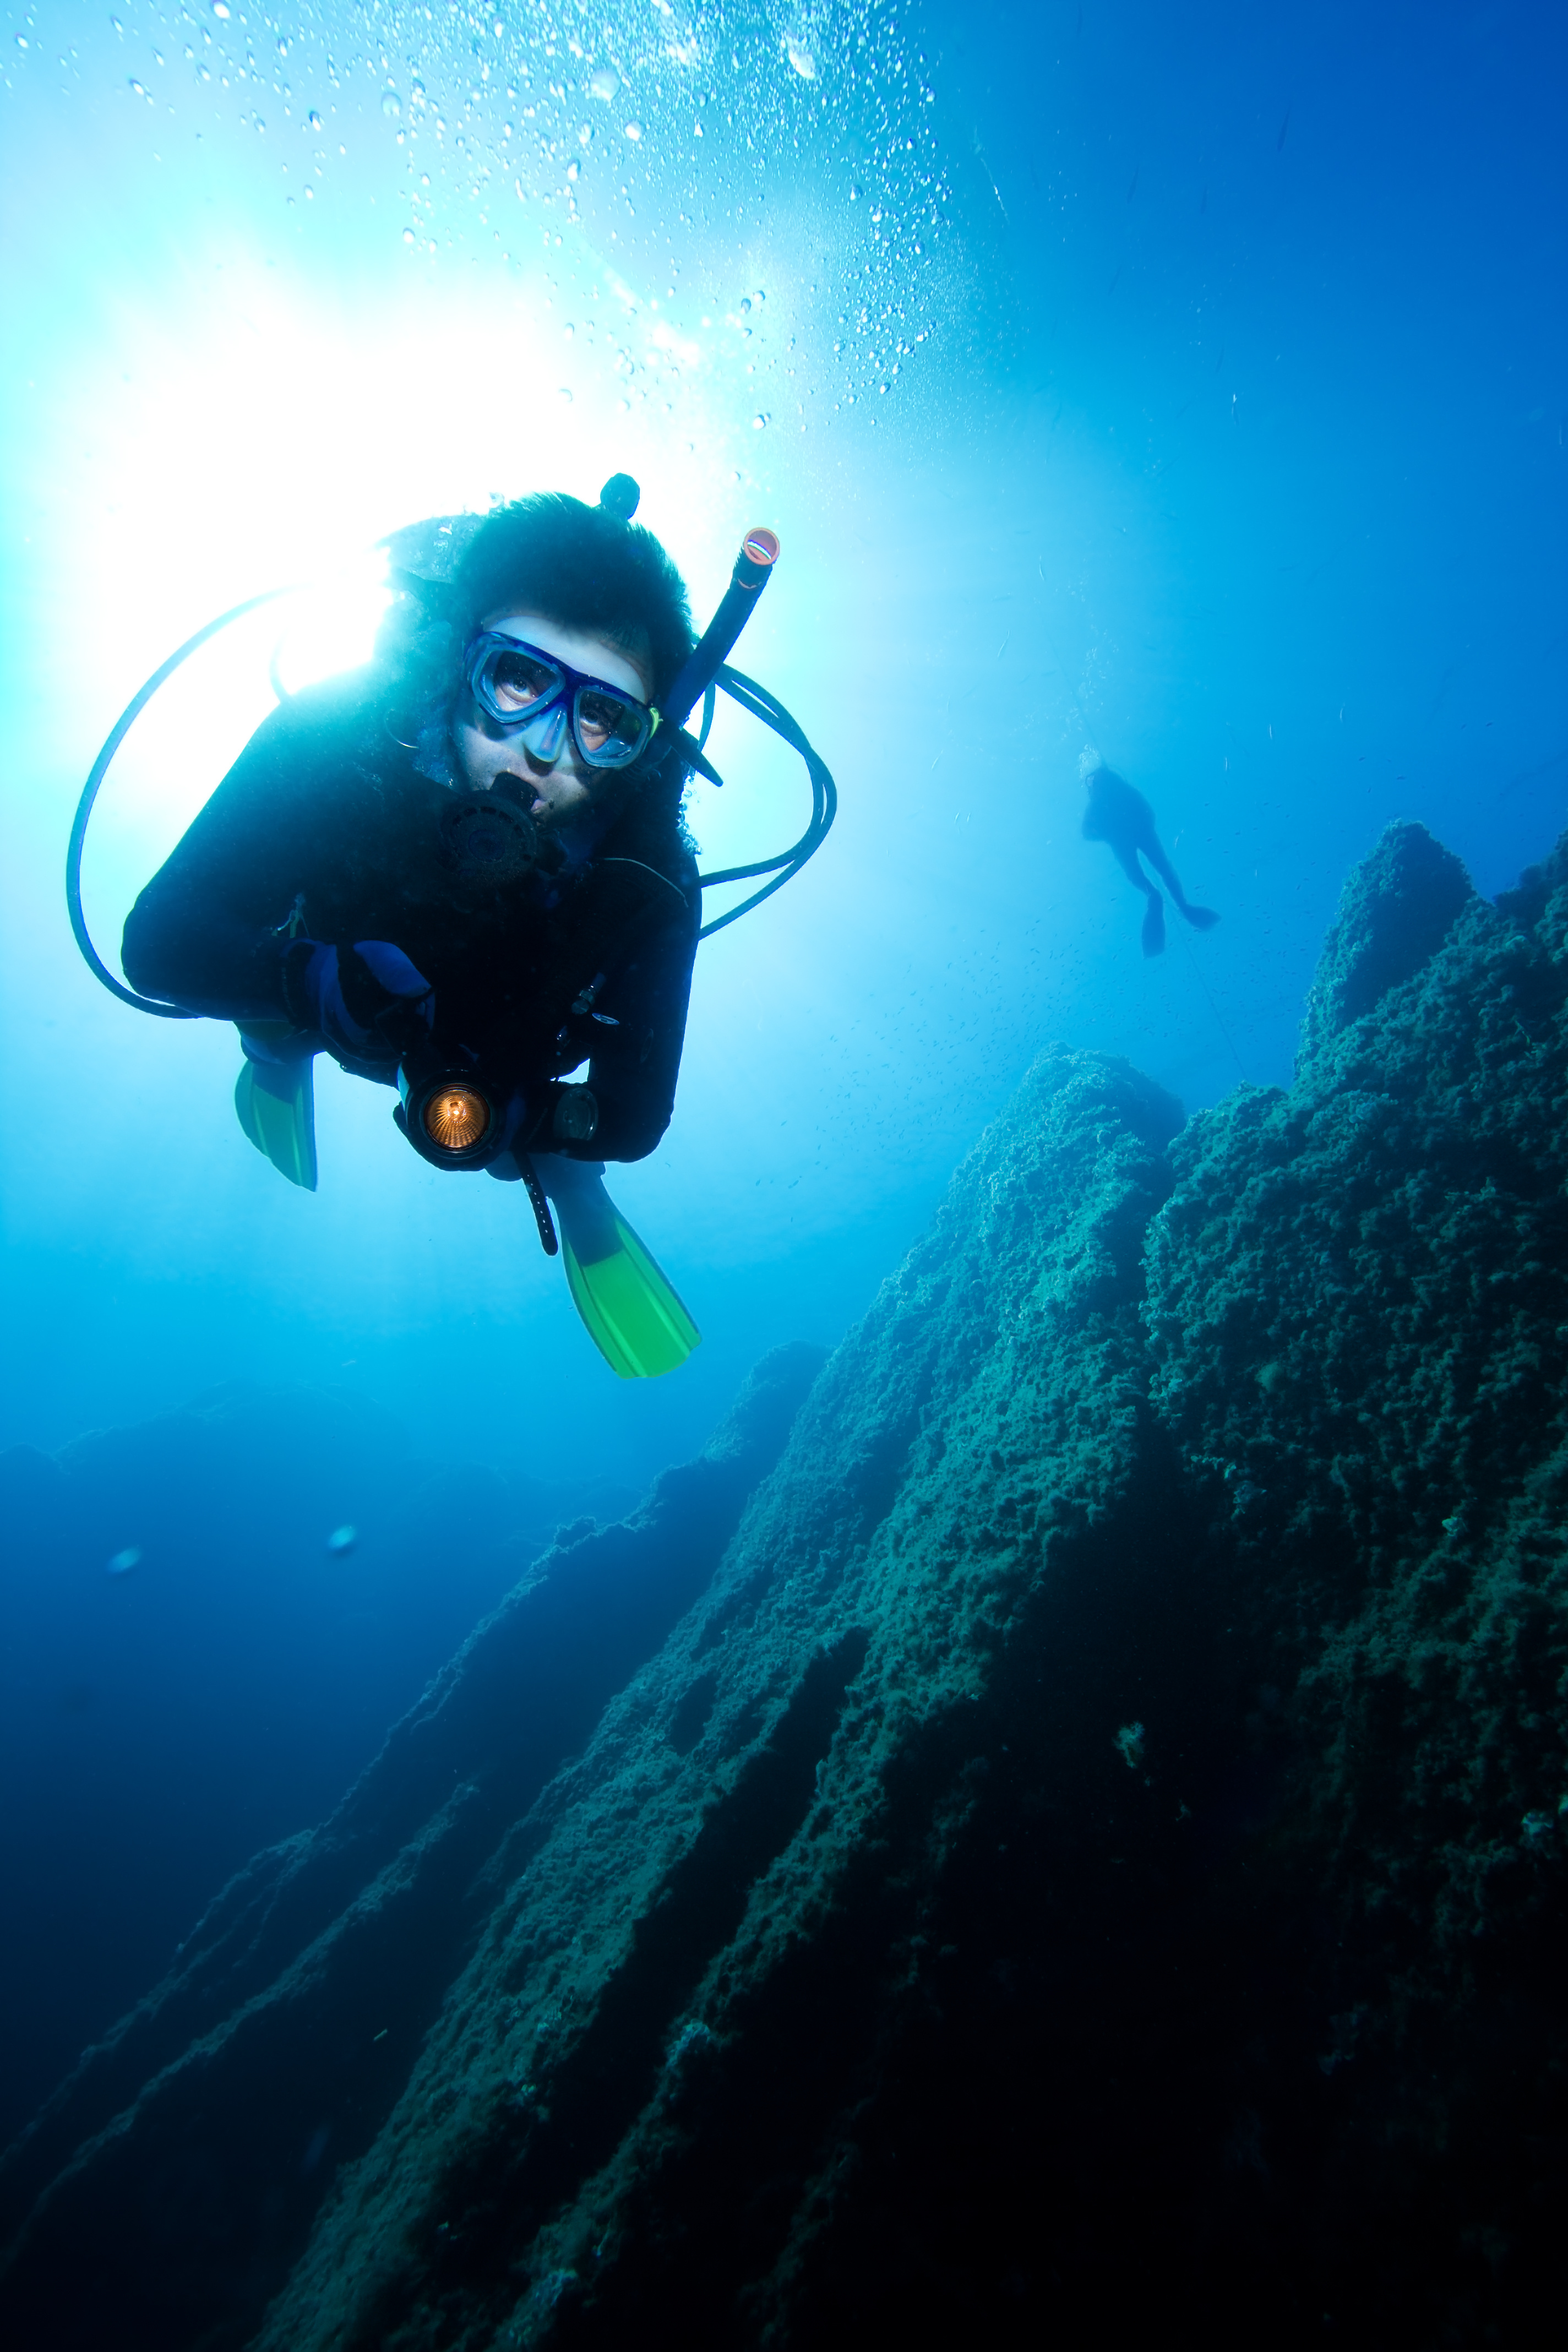 Female altitude divers slows down her ascent rate in an attempt to avoid decompression sickness (DCS) while diving at a high mountain lake